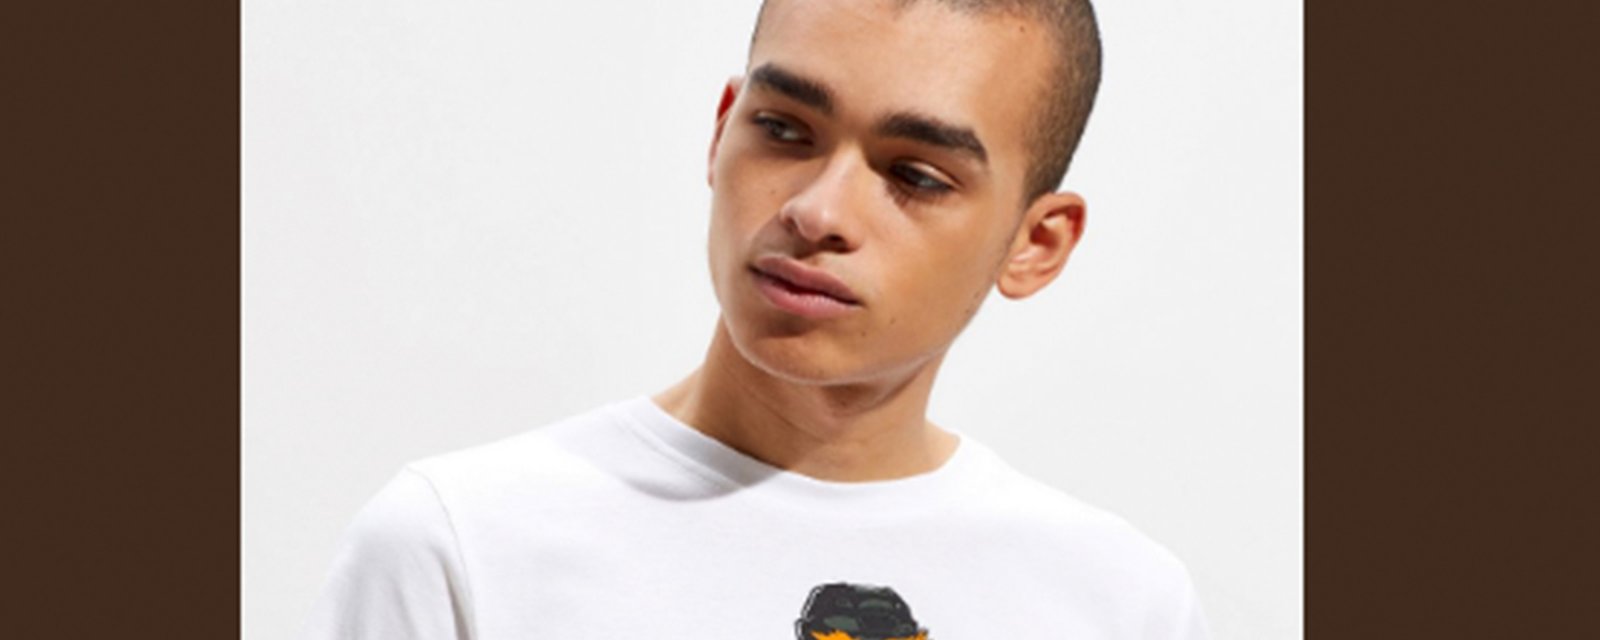 Fashion retailer Urban Outfitters now selling Gritty t-shirts